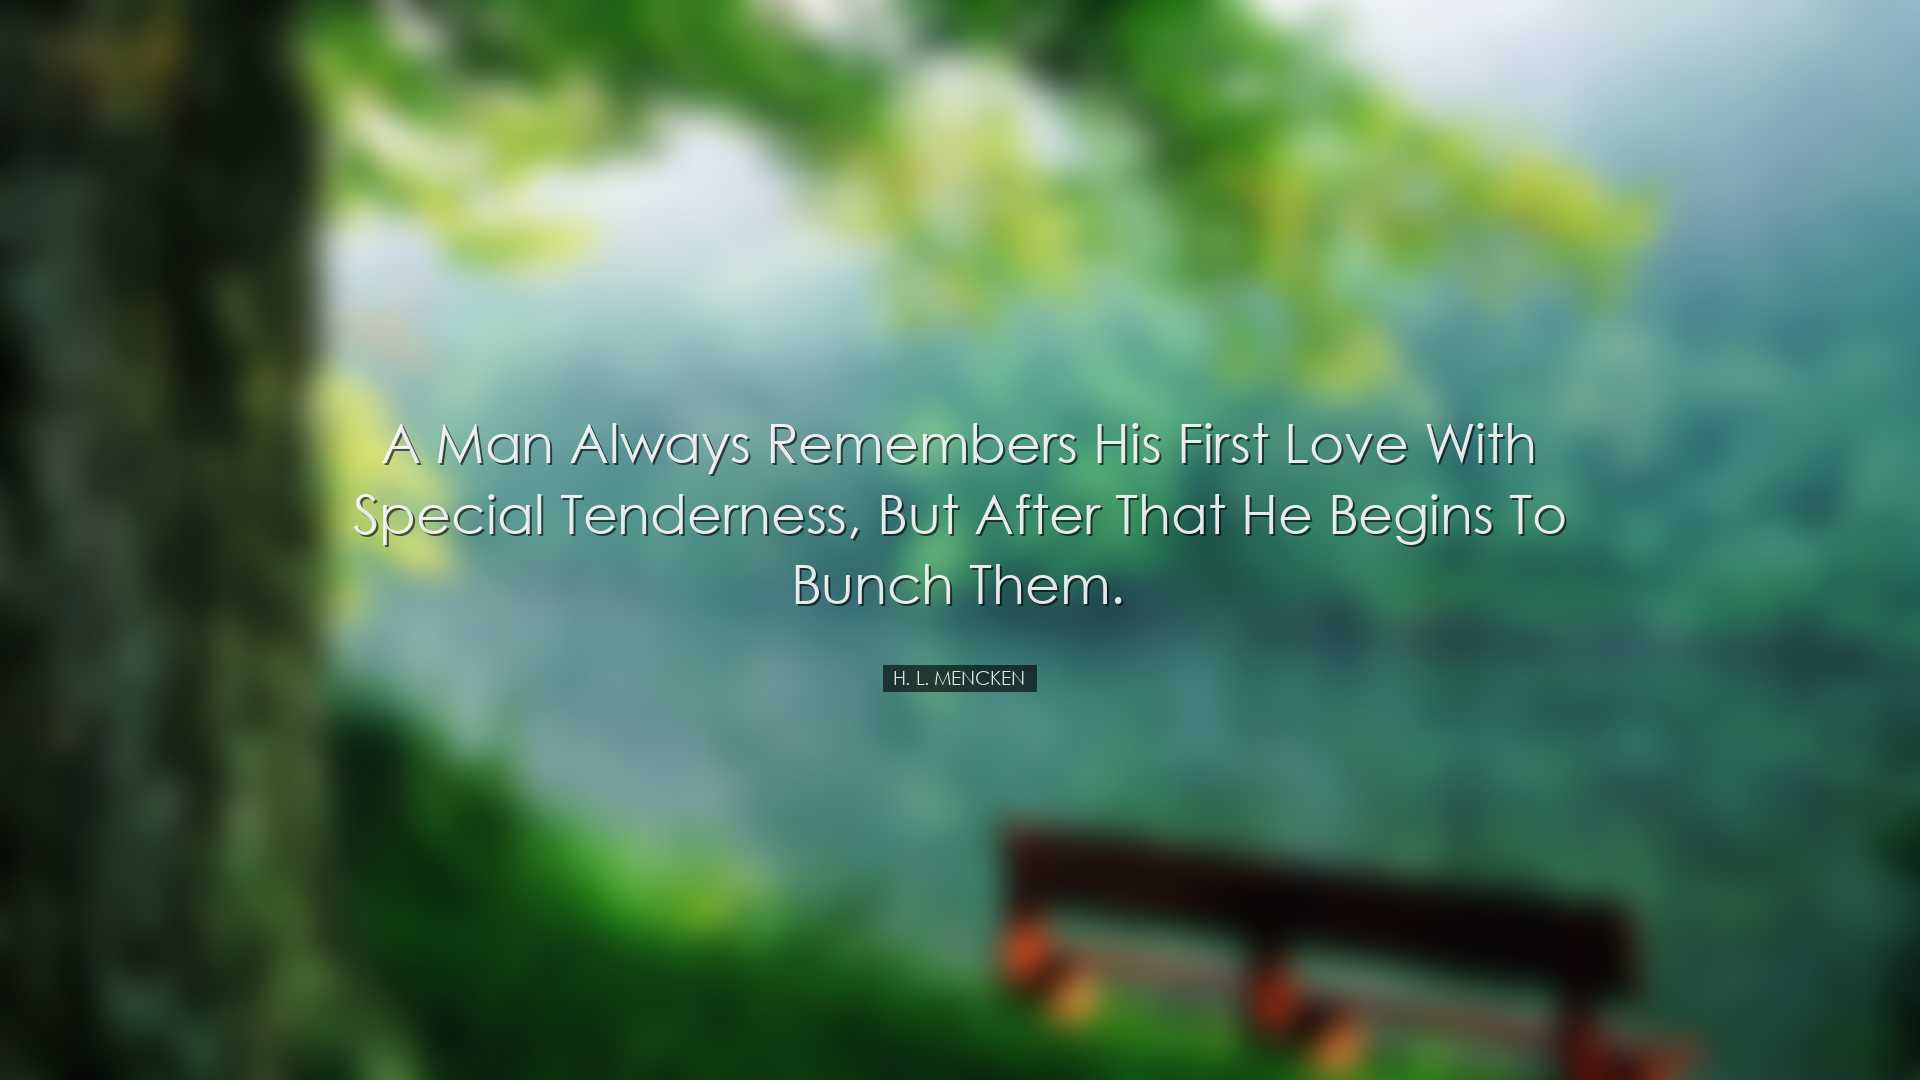 A man always remembers his first love with special tenderness, but